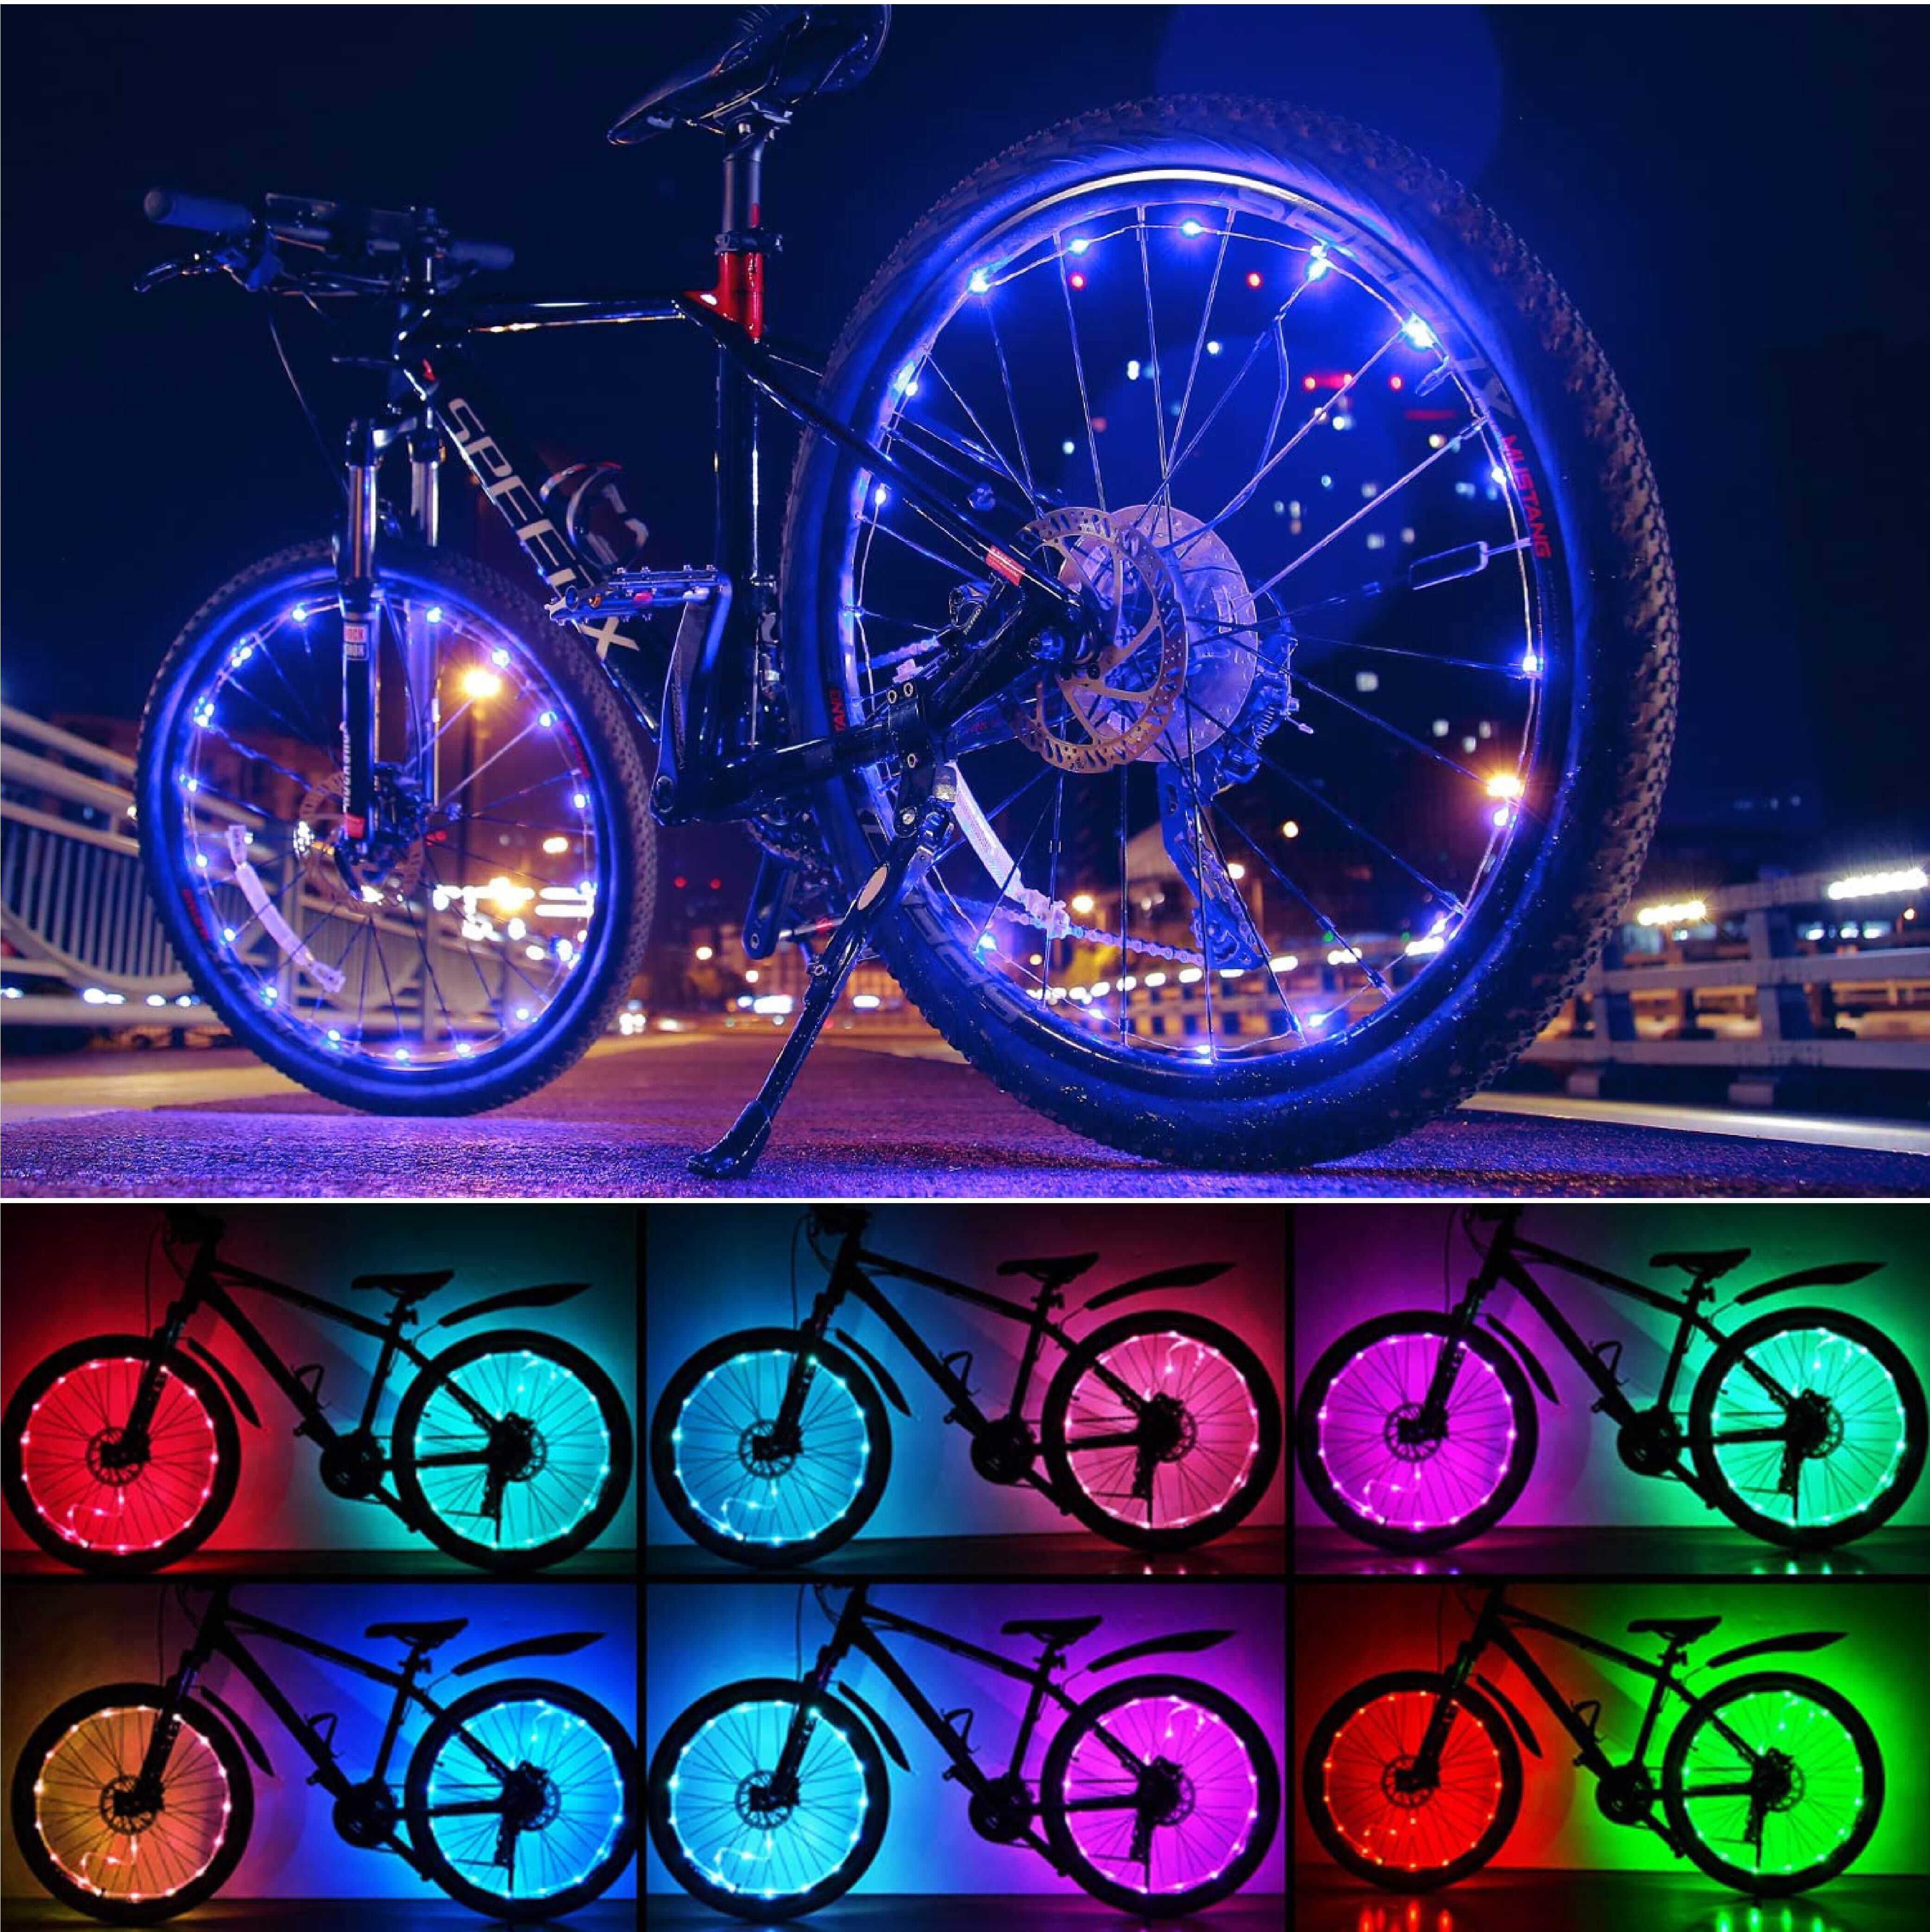 Bicycle Light 7 Colors 29 Lighting Modes and Strobes Great Gifts for Boys Girls Men Women Patent Pending Fussion Upgraded Multicolor Changing LED Bike Wheel Lights with APP Control Waterproof 